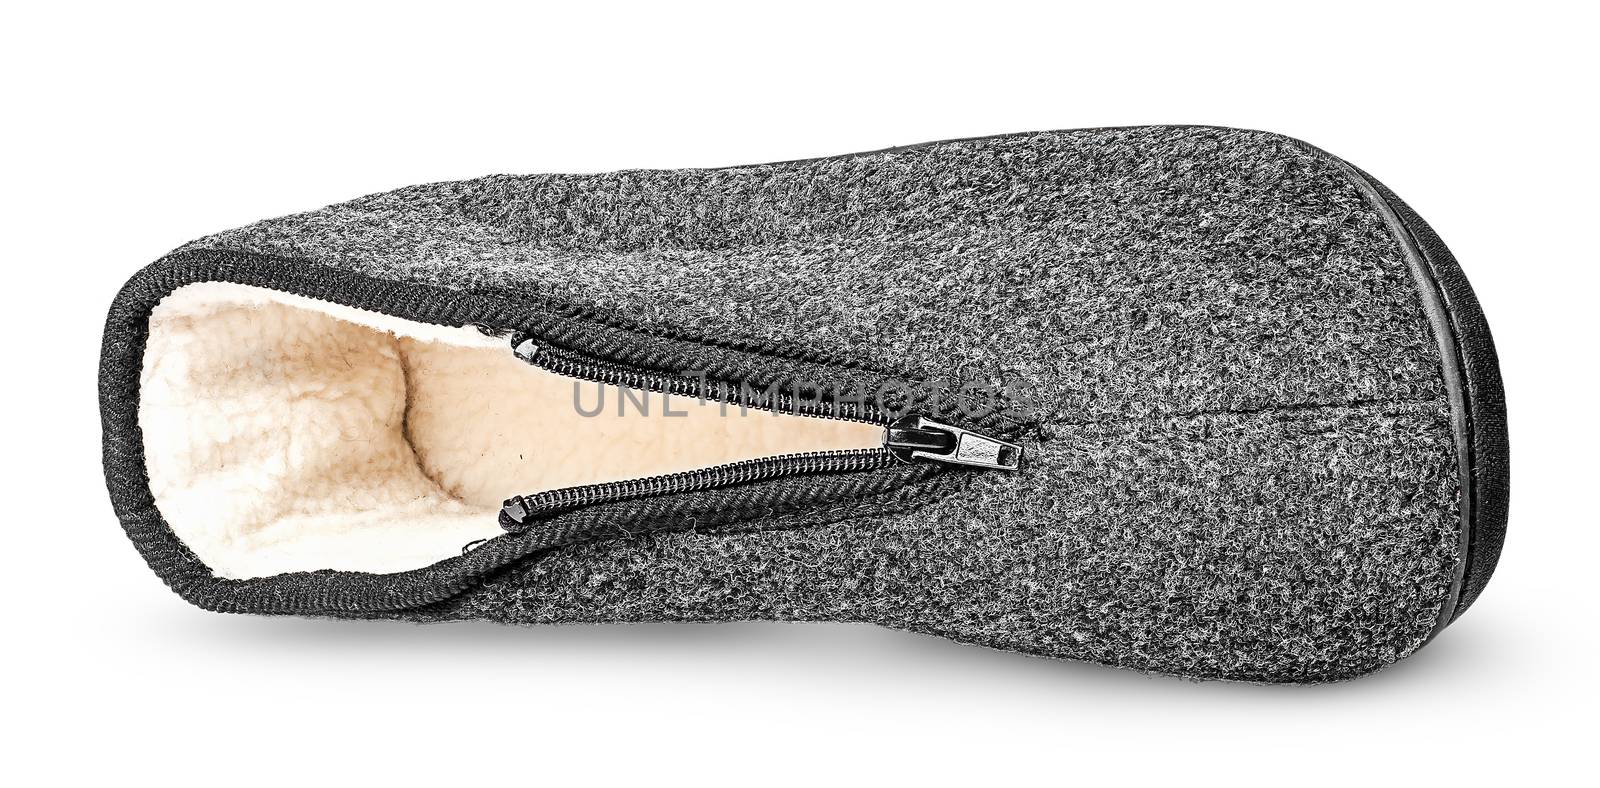 One piece the comfortable dark gray slipper lying on the side by Cipariss